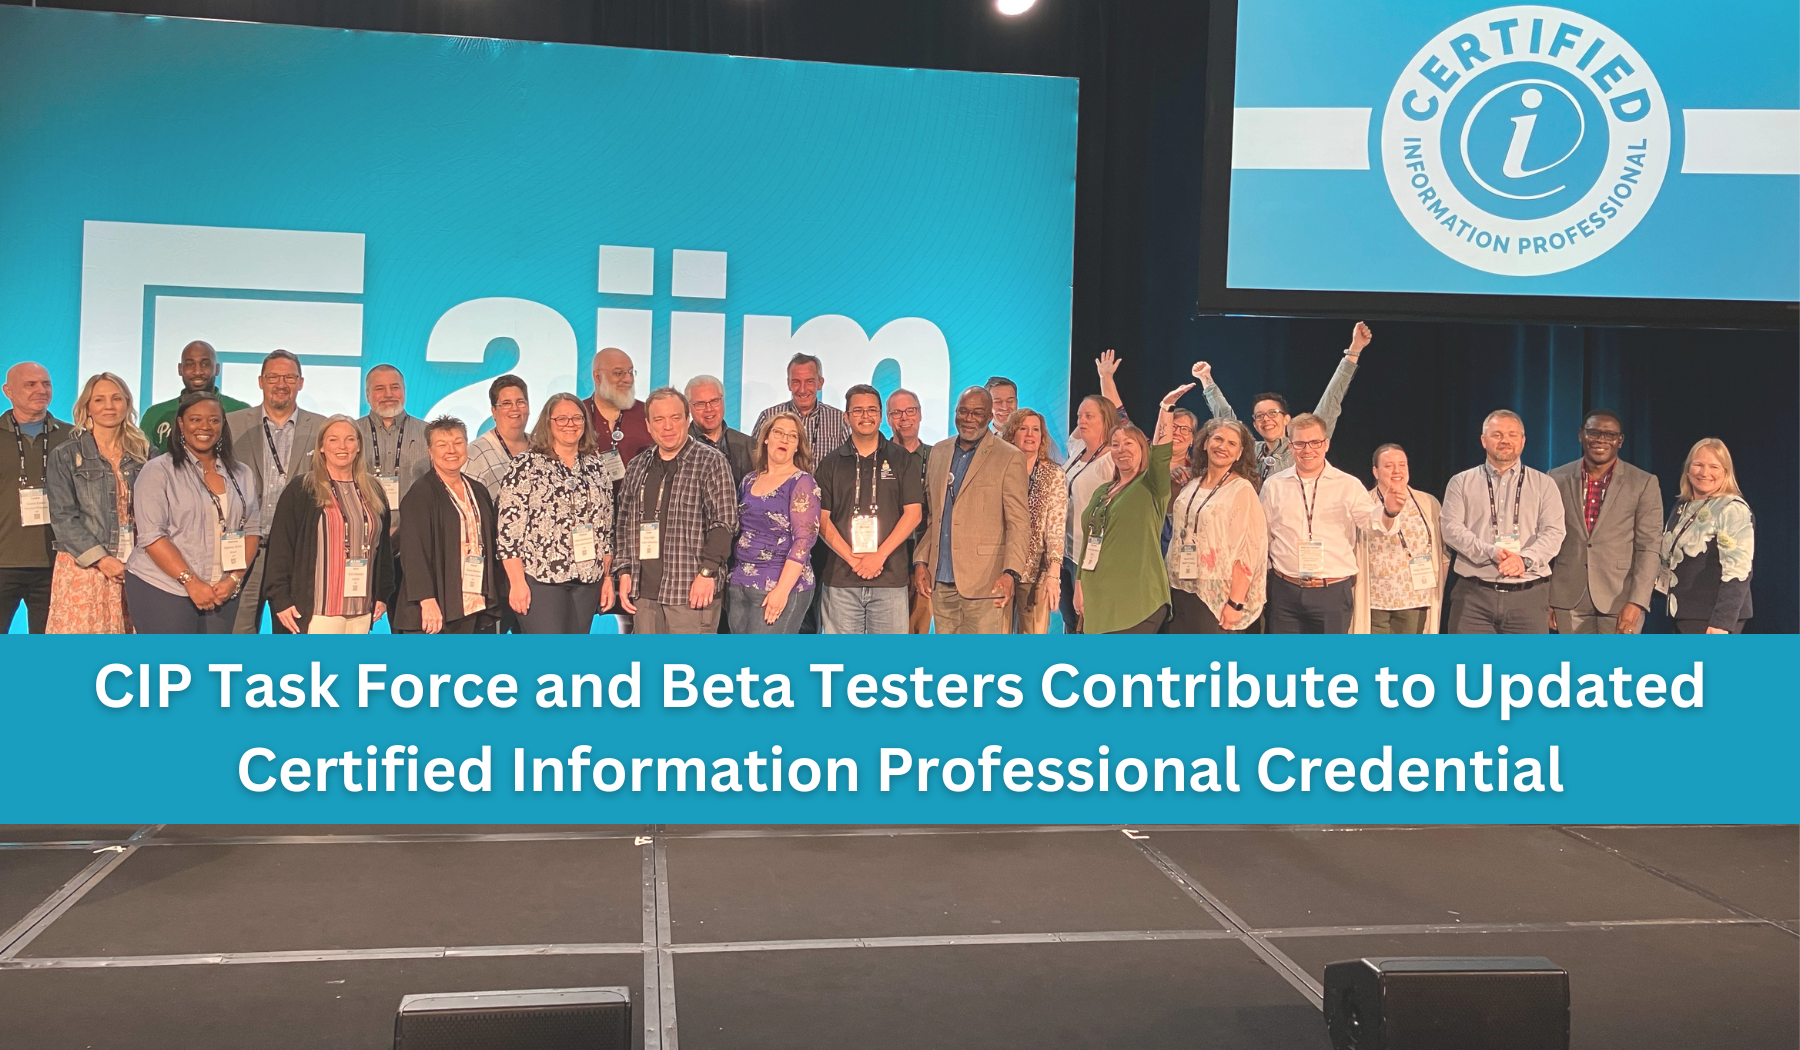 CIP Task Force and Beta Testers Contribute to Updated Certified Information Professional Credential